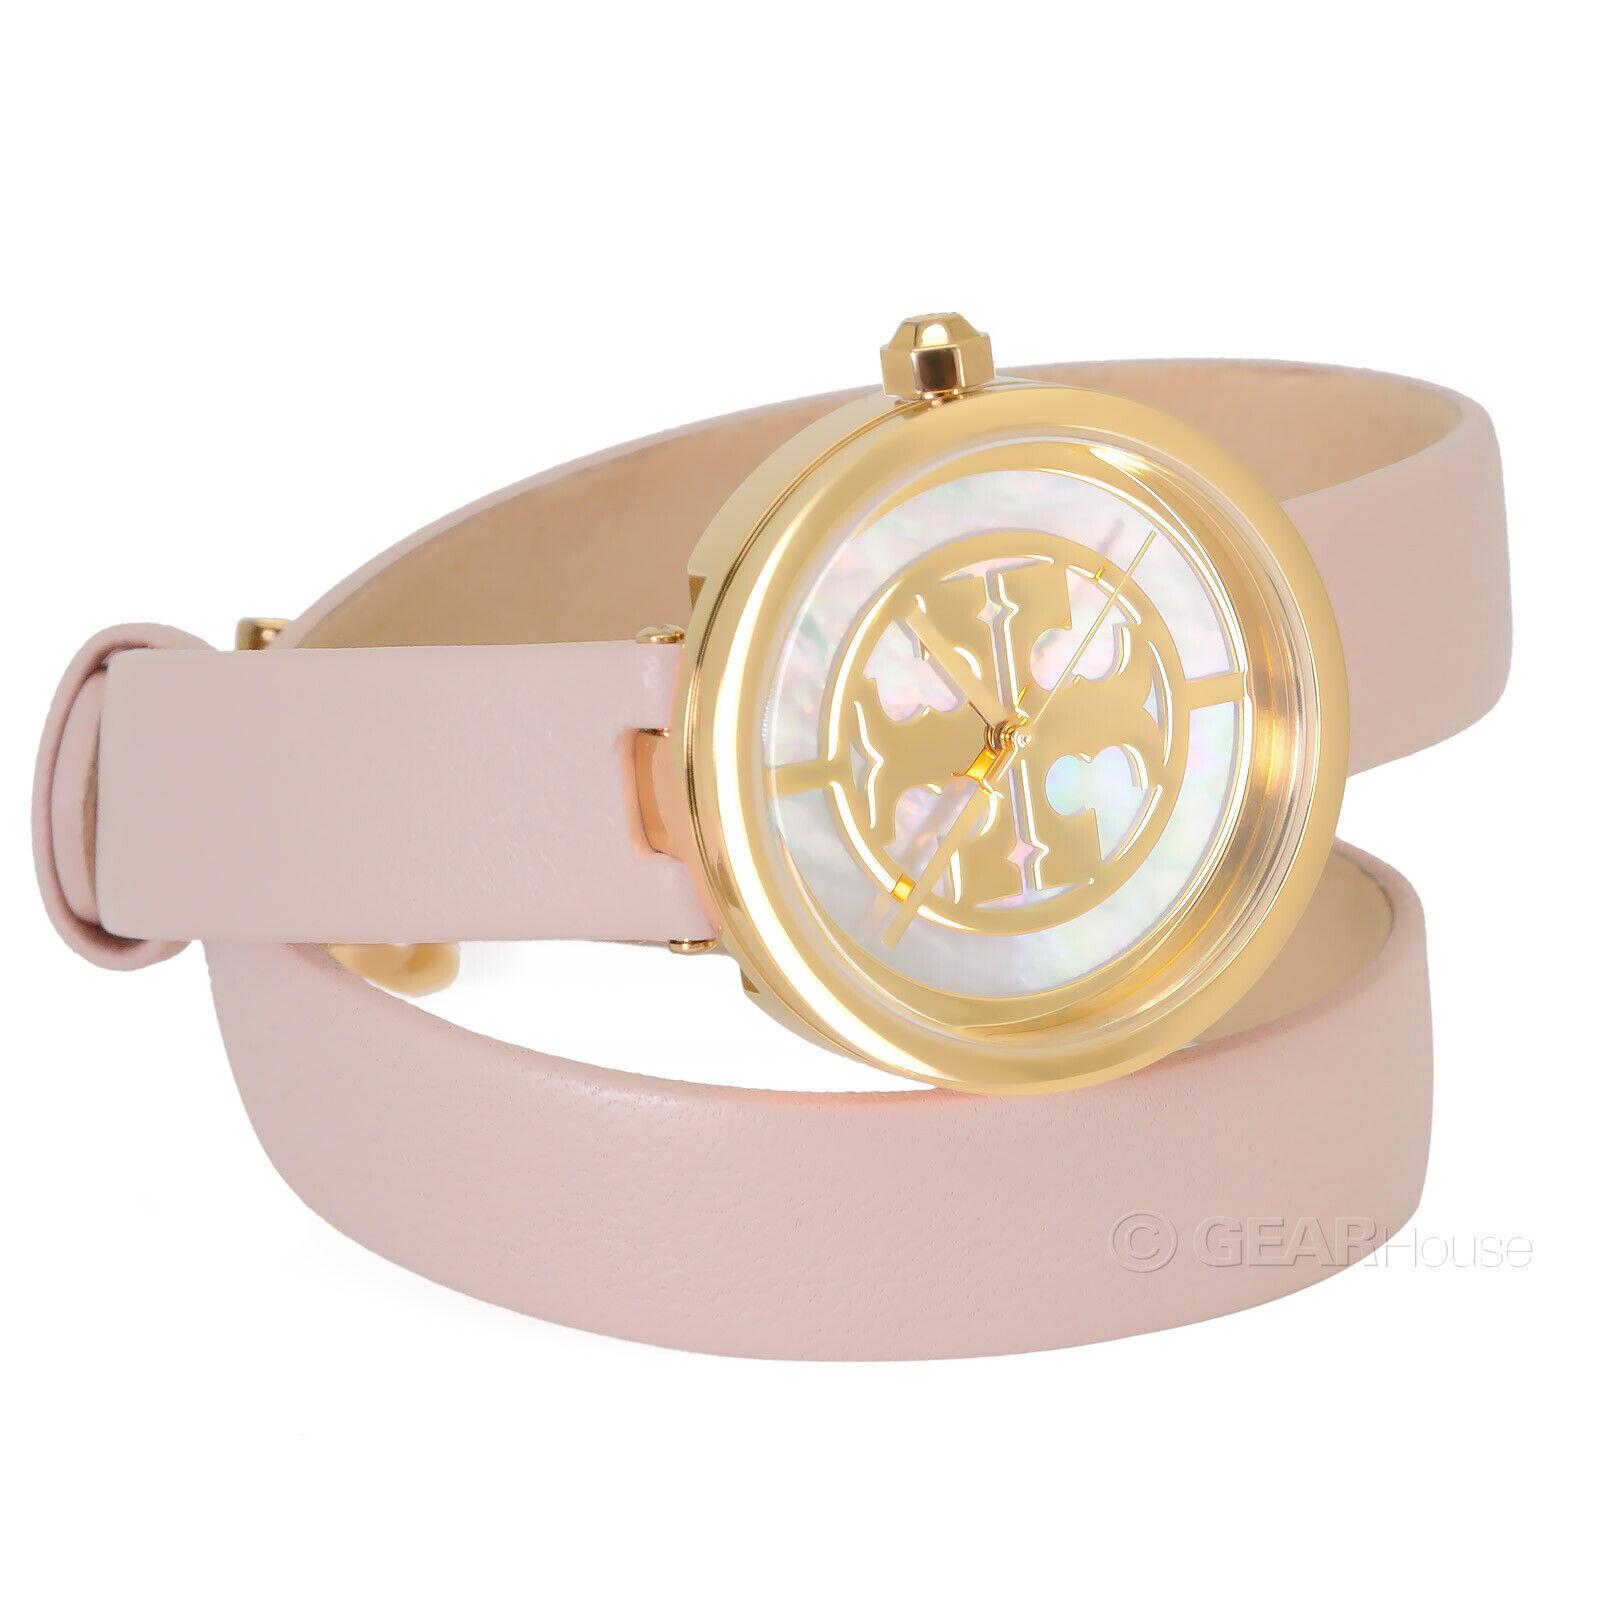 Tory Burch Reva Womens Gold Watch Mother Pearl Dial Double Wrap Pink Leather - White Dial, Pink Band, Gold Bezel